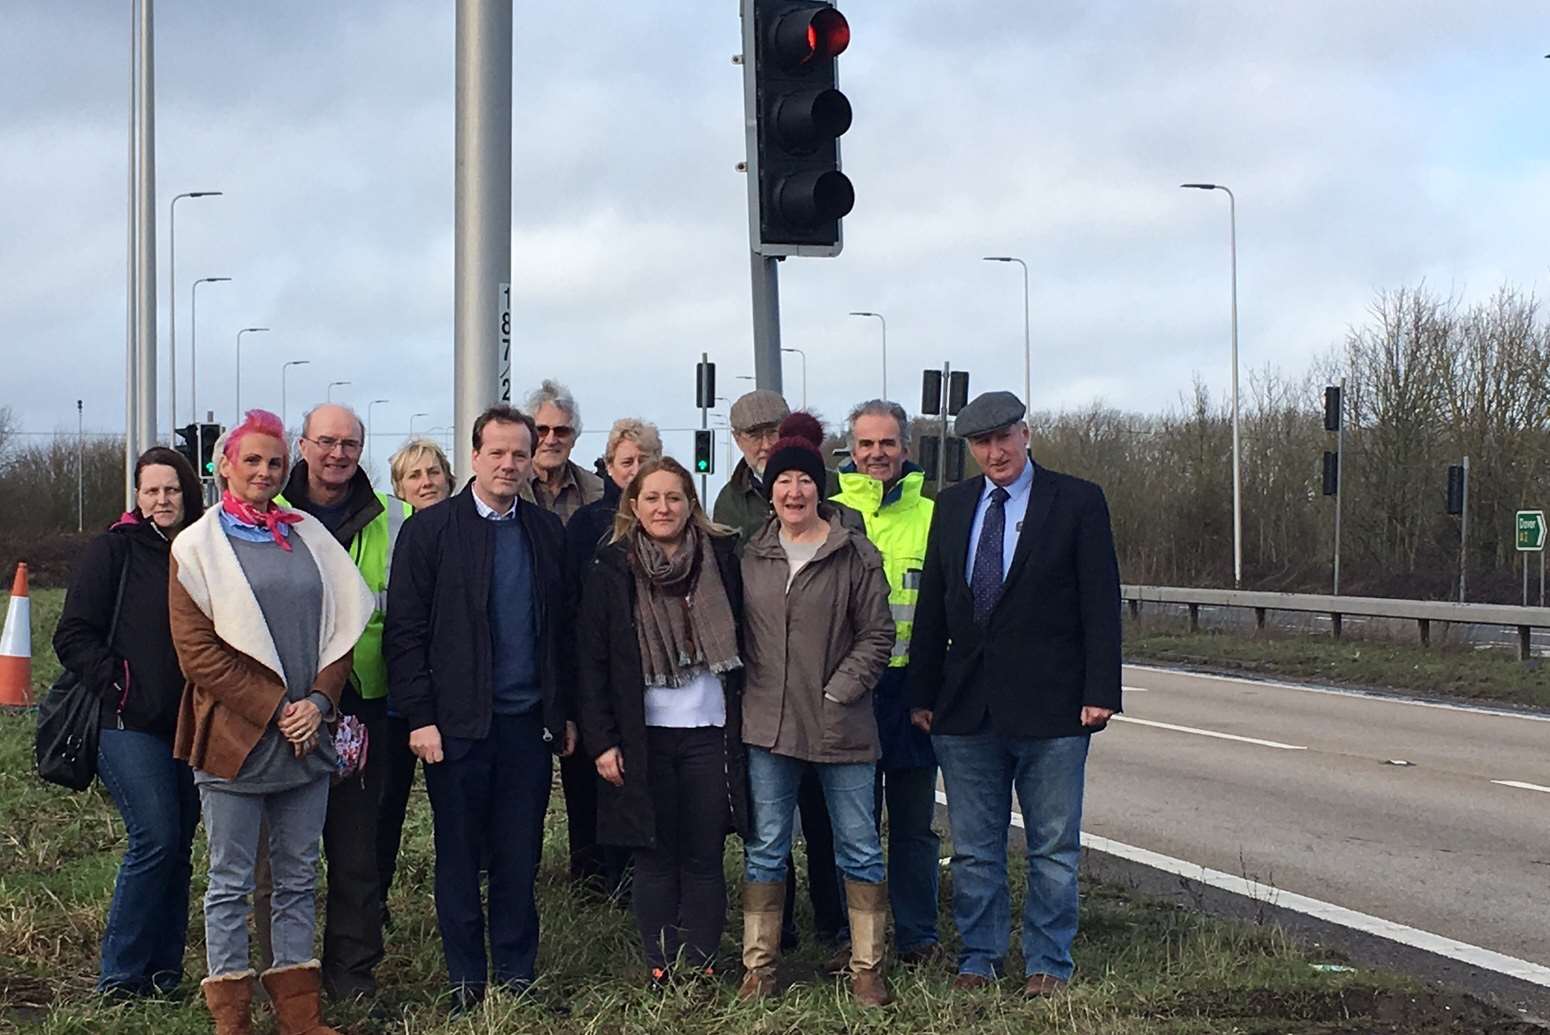 Dover MP Charlie Elphicke with residents at the lights at the Lydden Hill junction by the A2. Charlotte Byrom is pictured directly to his right